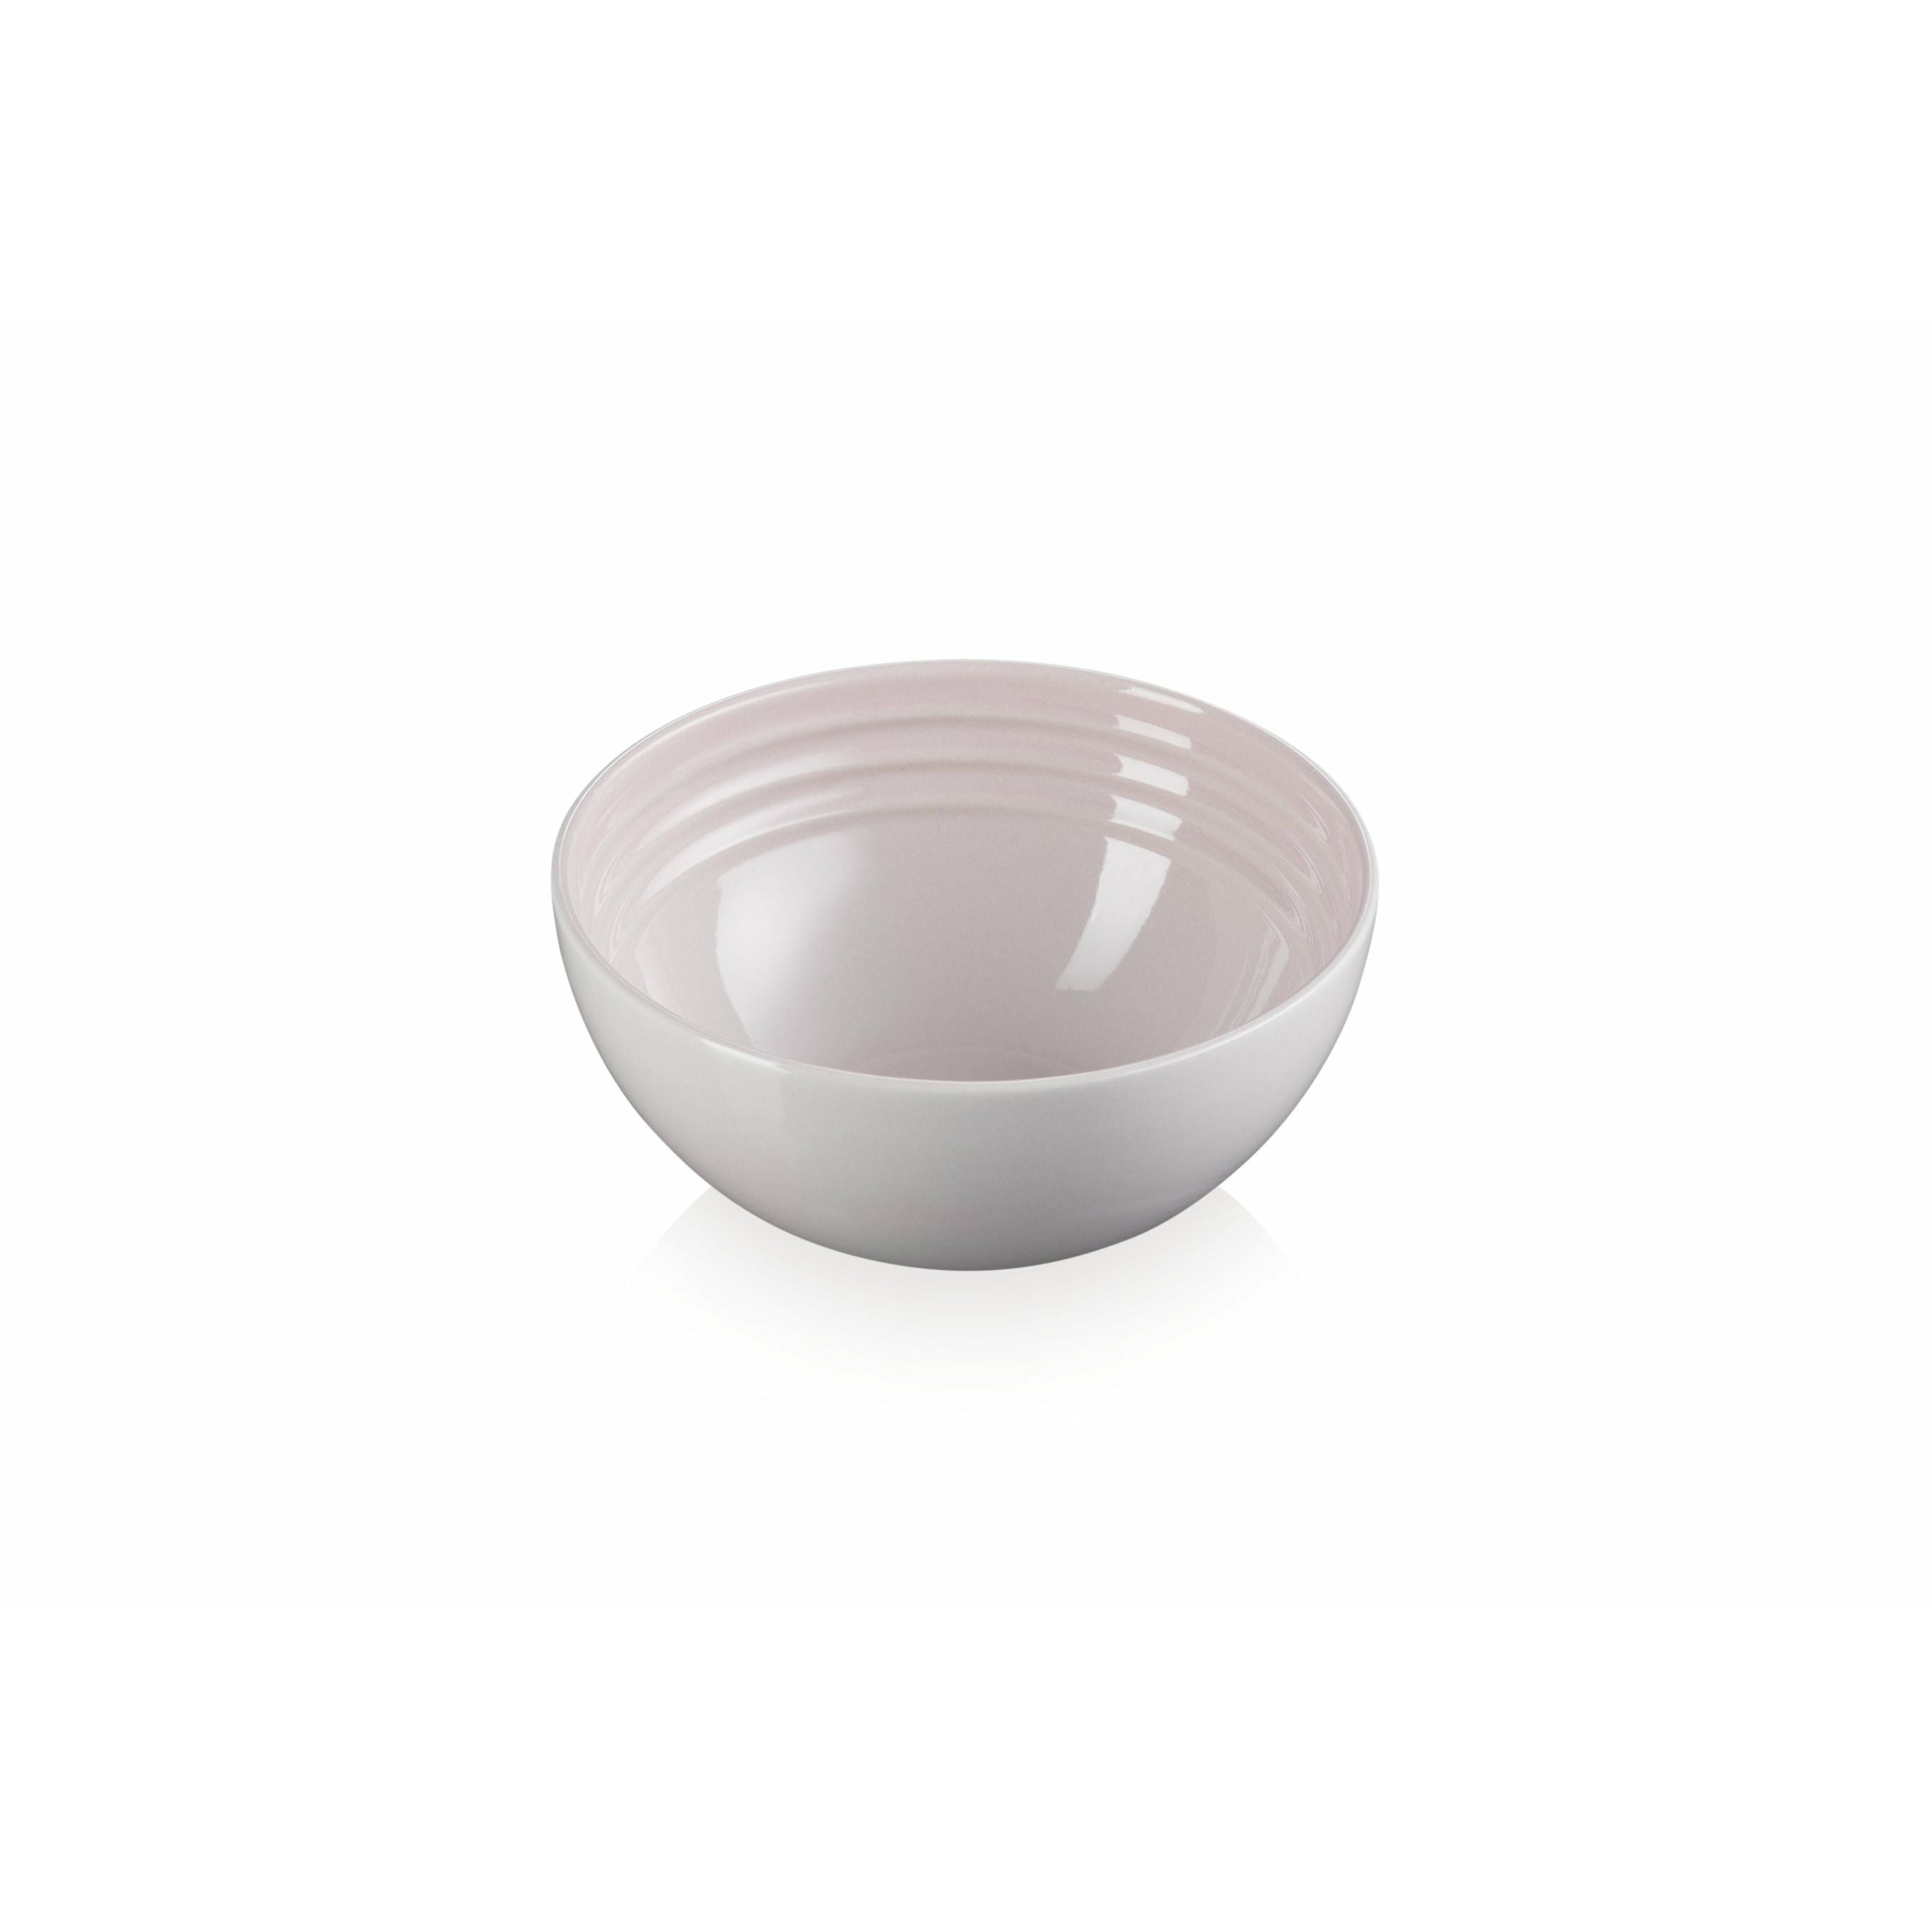 Le Creuset Snack Bowl 12 cm, Shell Pink